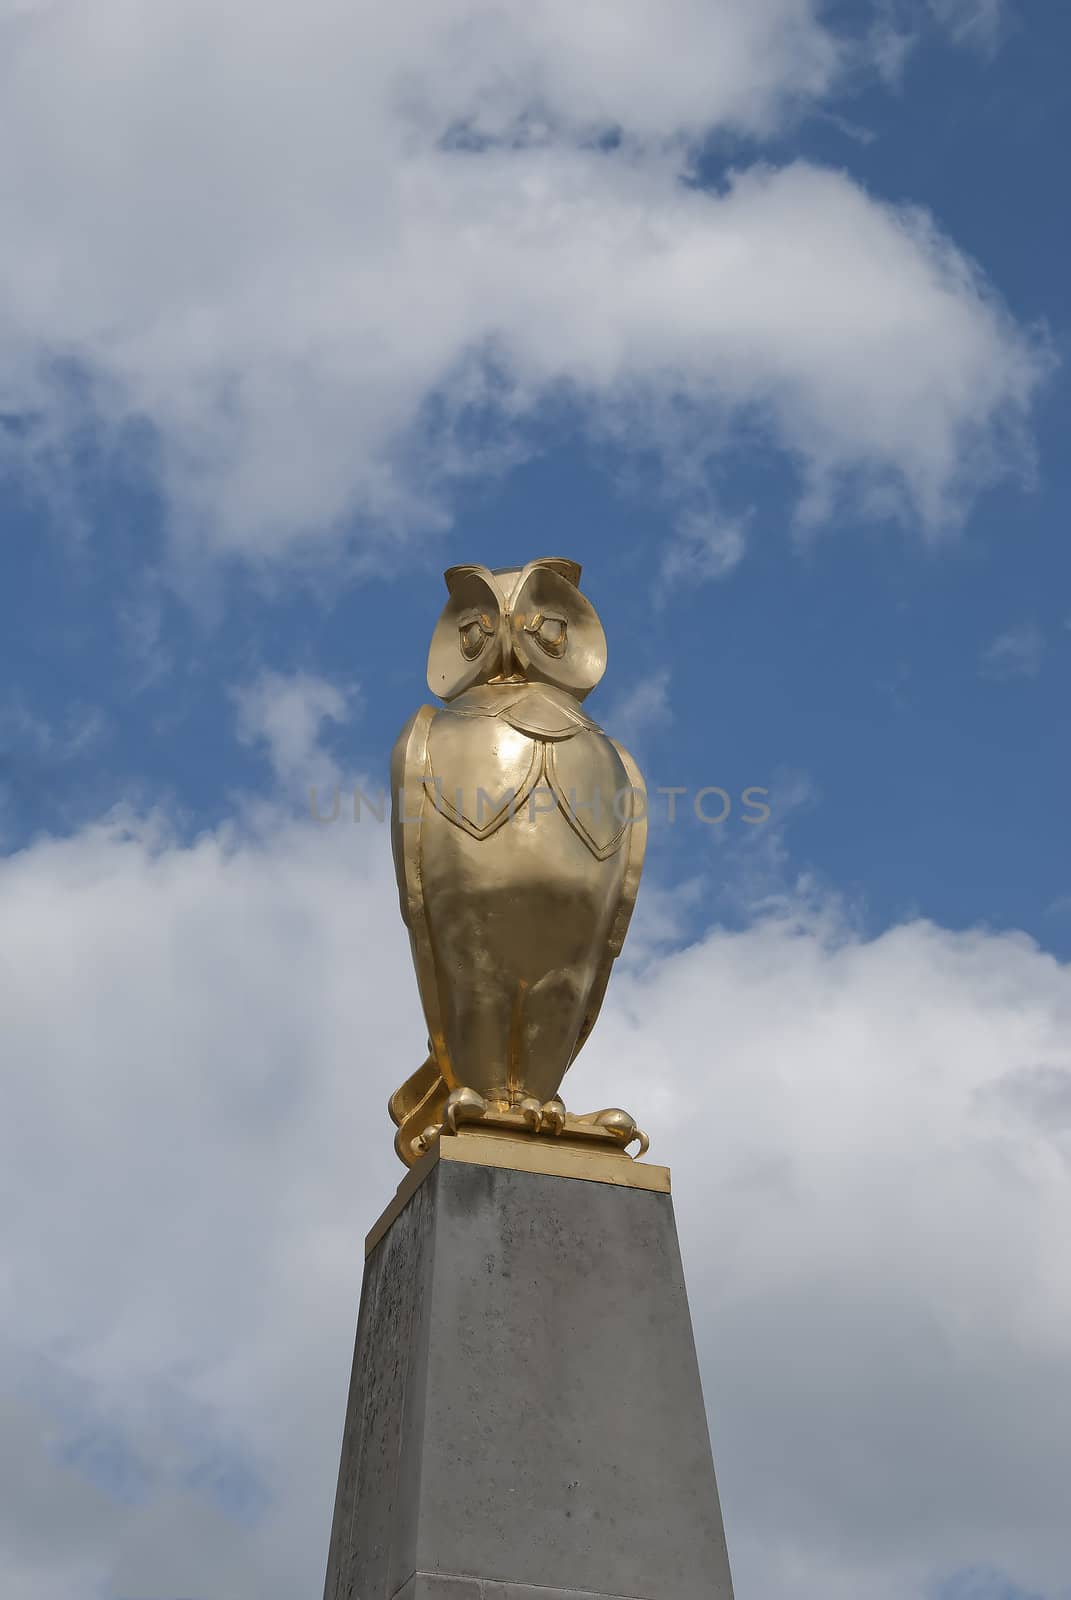 A Gold Coloured Statue of an Owl against a summer sky